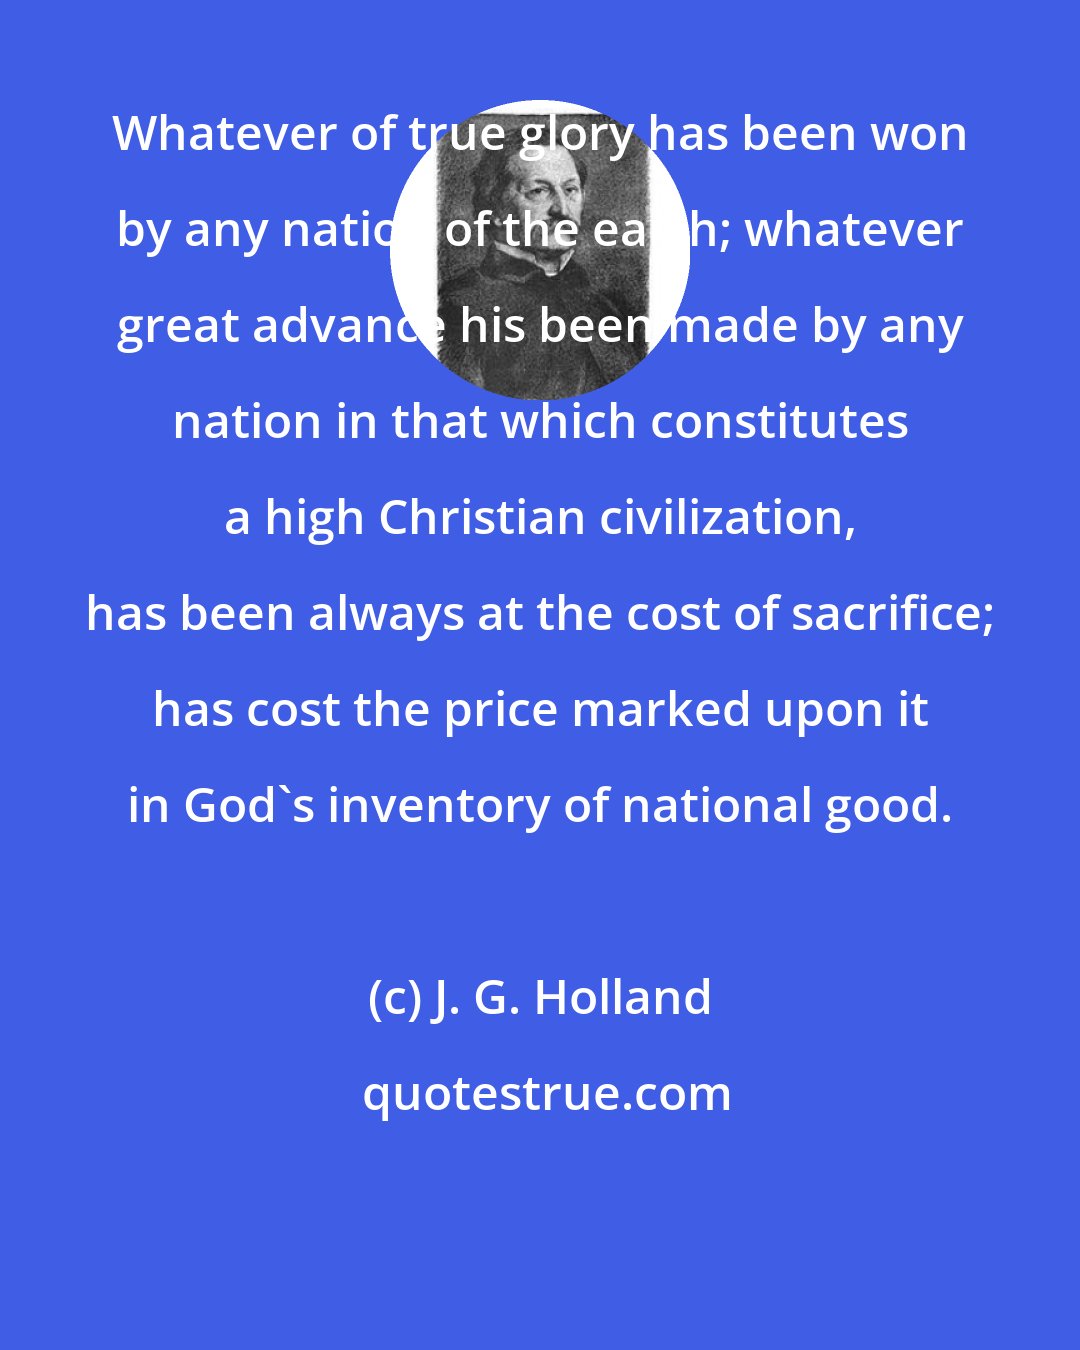 J. G. Holland: Whatever of true glory has been won by any nation of the earth; whatever great advance his been made by any nation in that which constitutes a high Christian civilization, has been always at the cost of sacrifice; has cost the price marked upon it in God's inventory of national good.